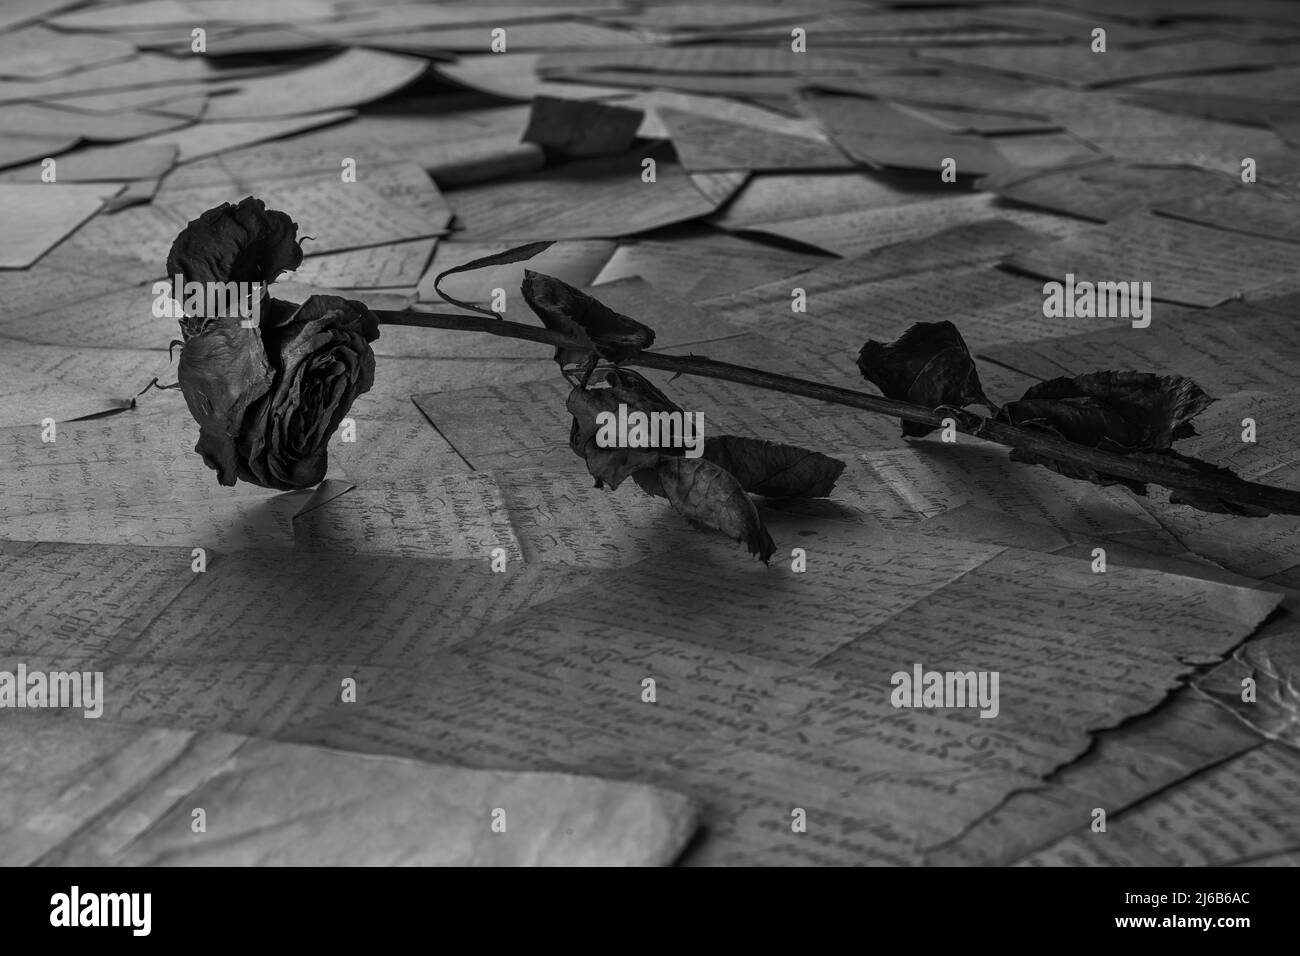 A withered rose lying on a pile of old letters artistic black and white image. Memories, family history, past and nostalgia theme Stock Photo